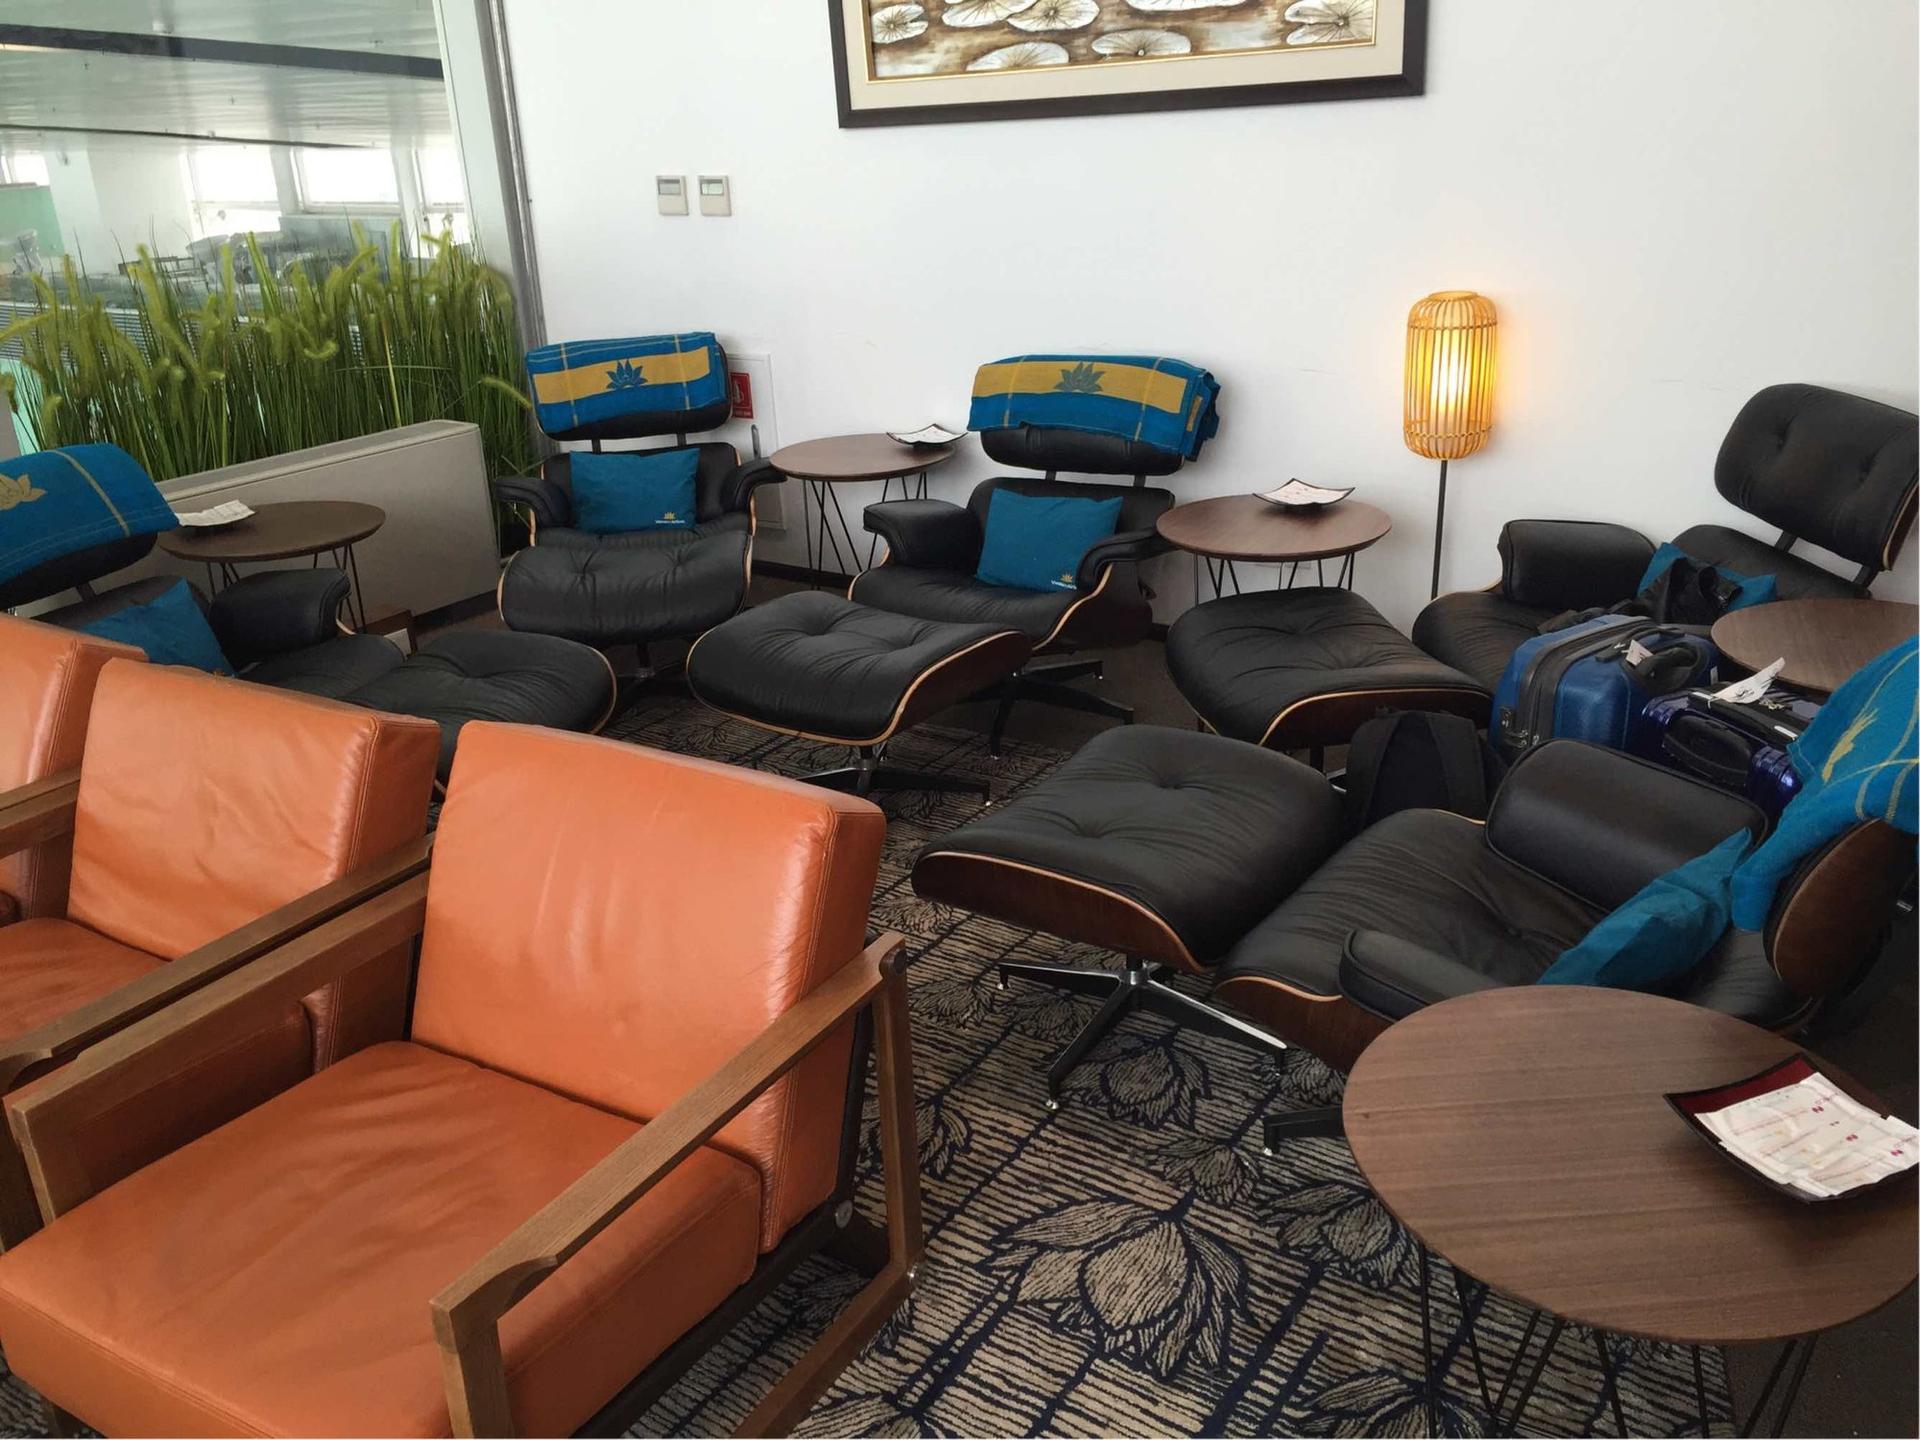 Vietnam Airlines Business Class Lounge image 7 of 16